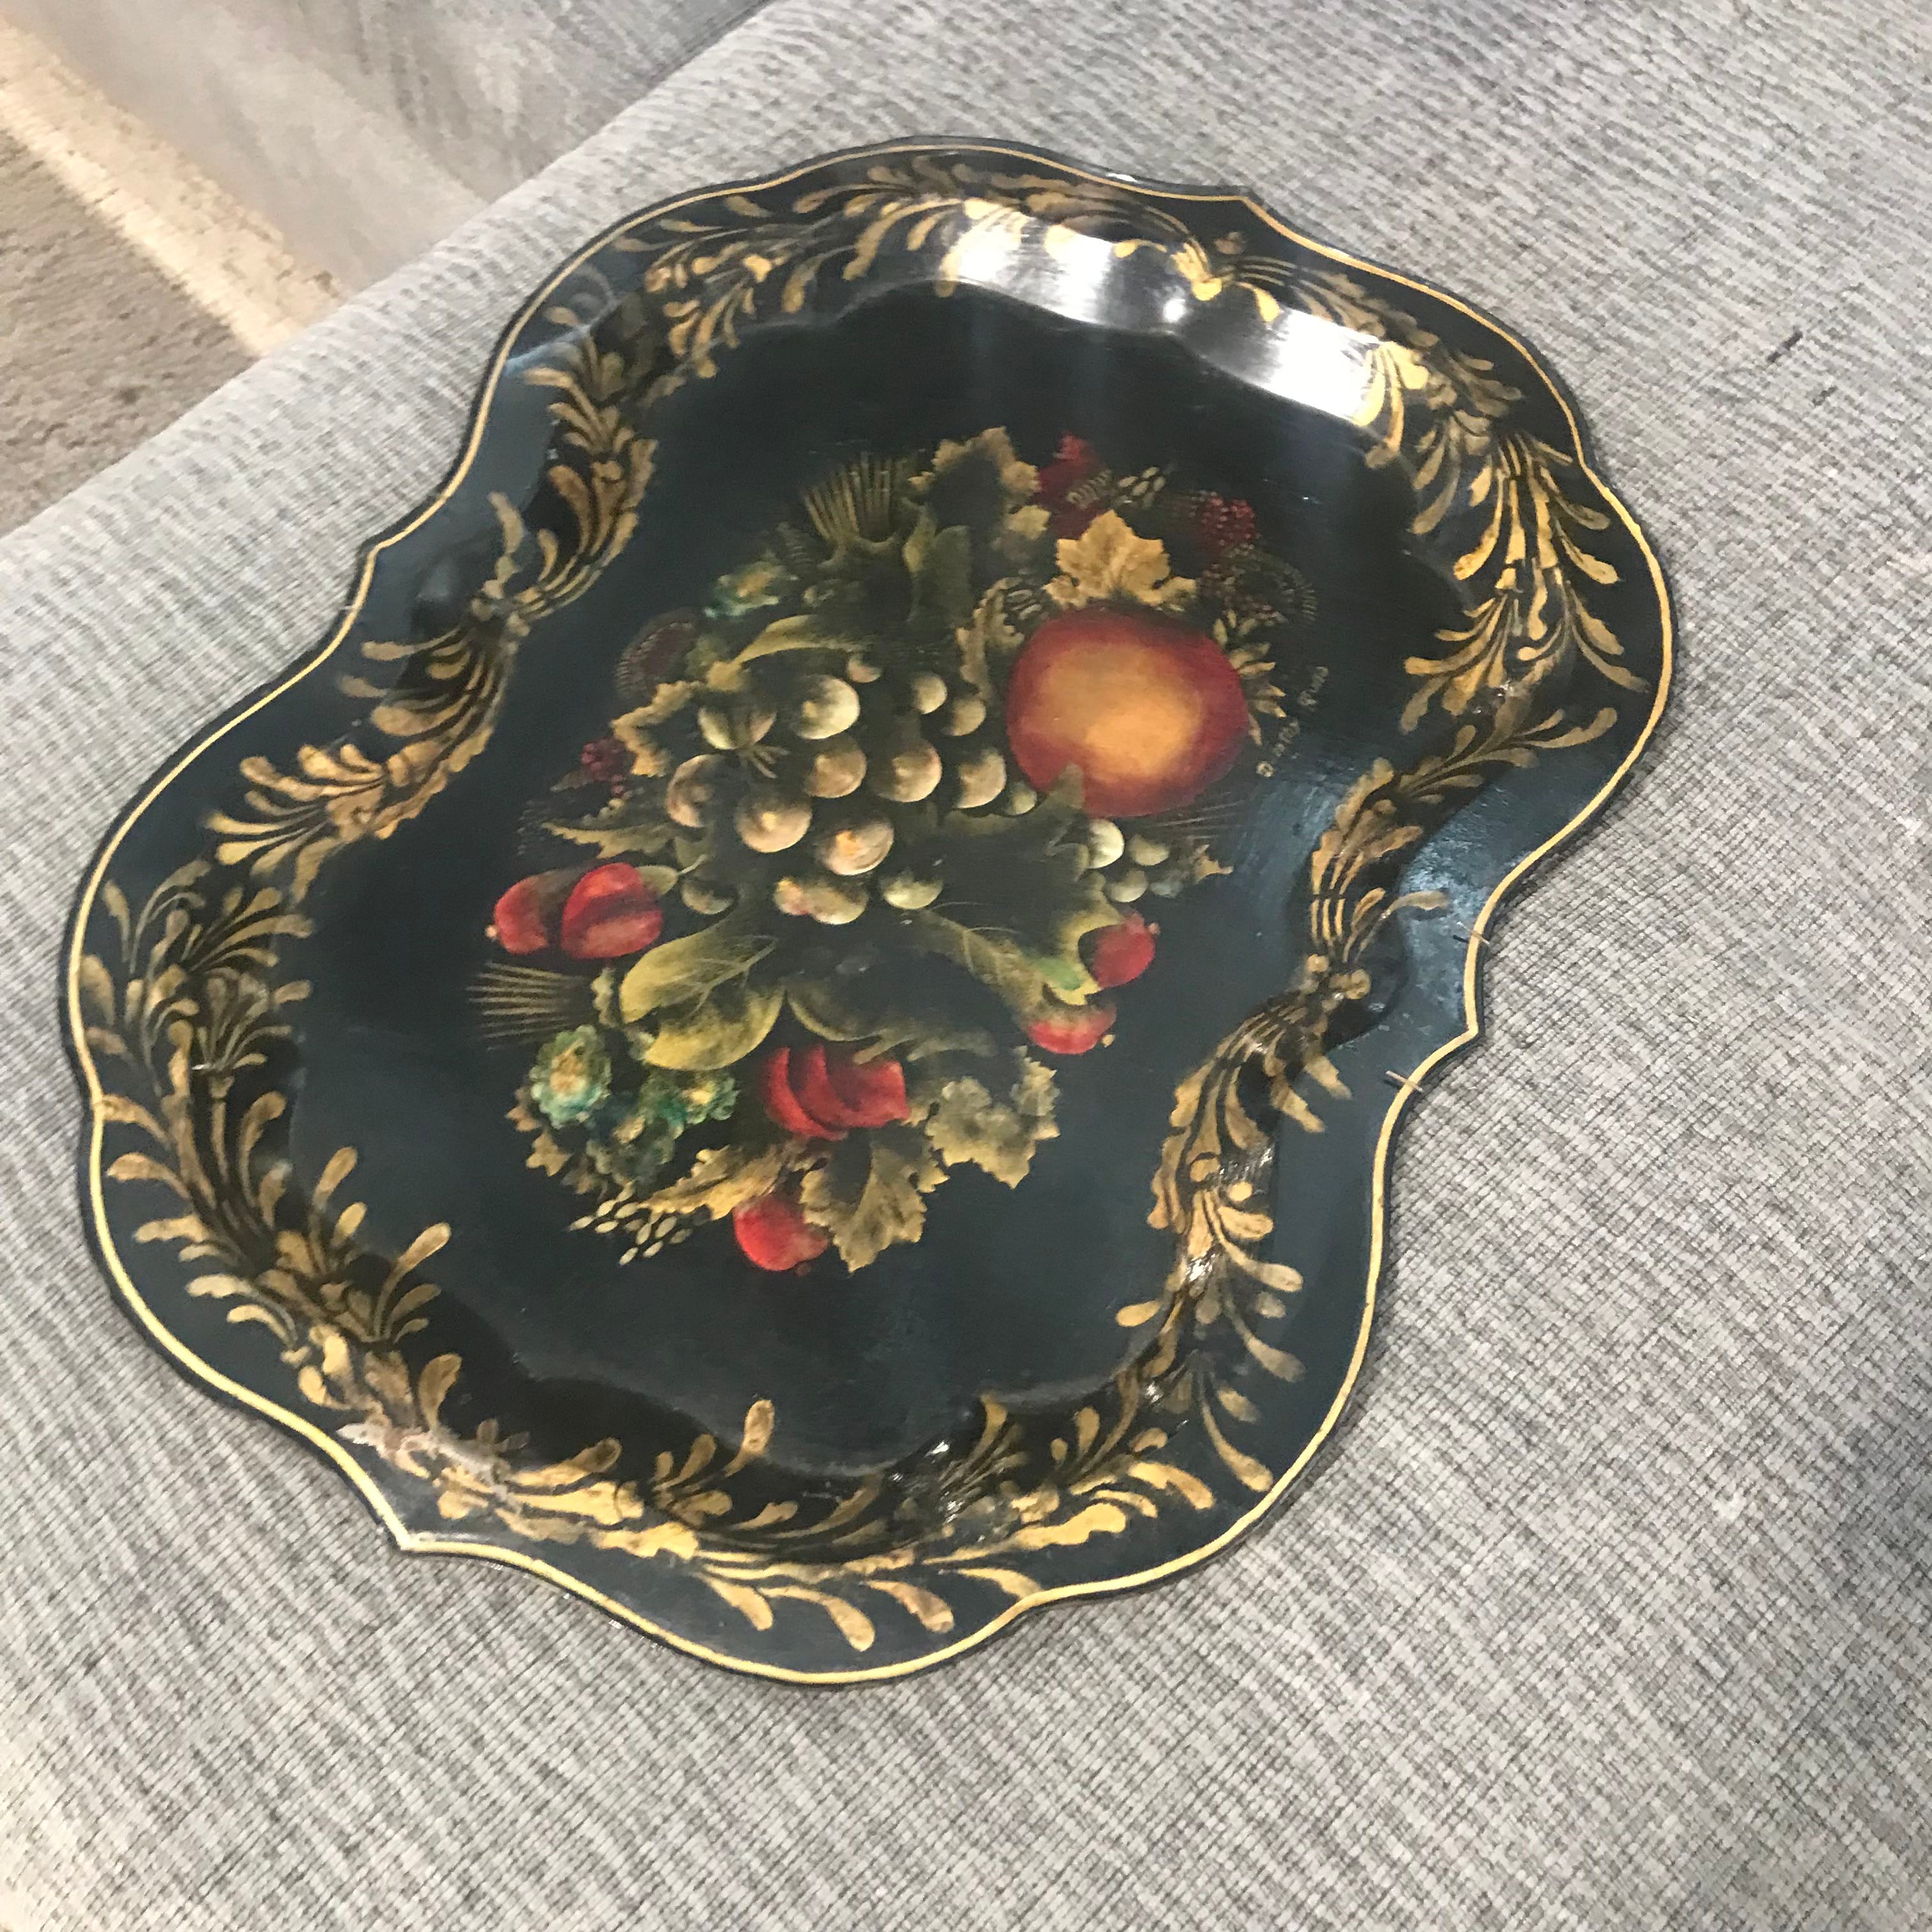 24"x 18.5" 1930's Handpainted with Chippendale Shape Signed Tole Painted Tray